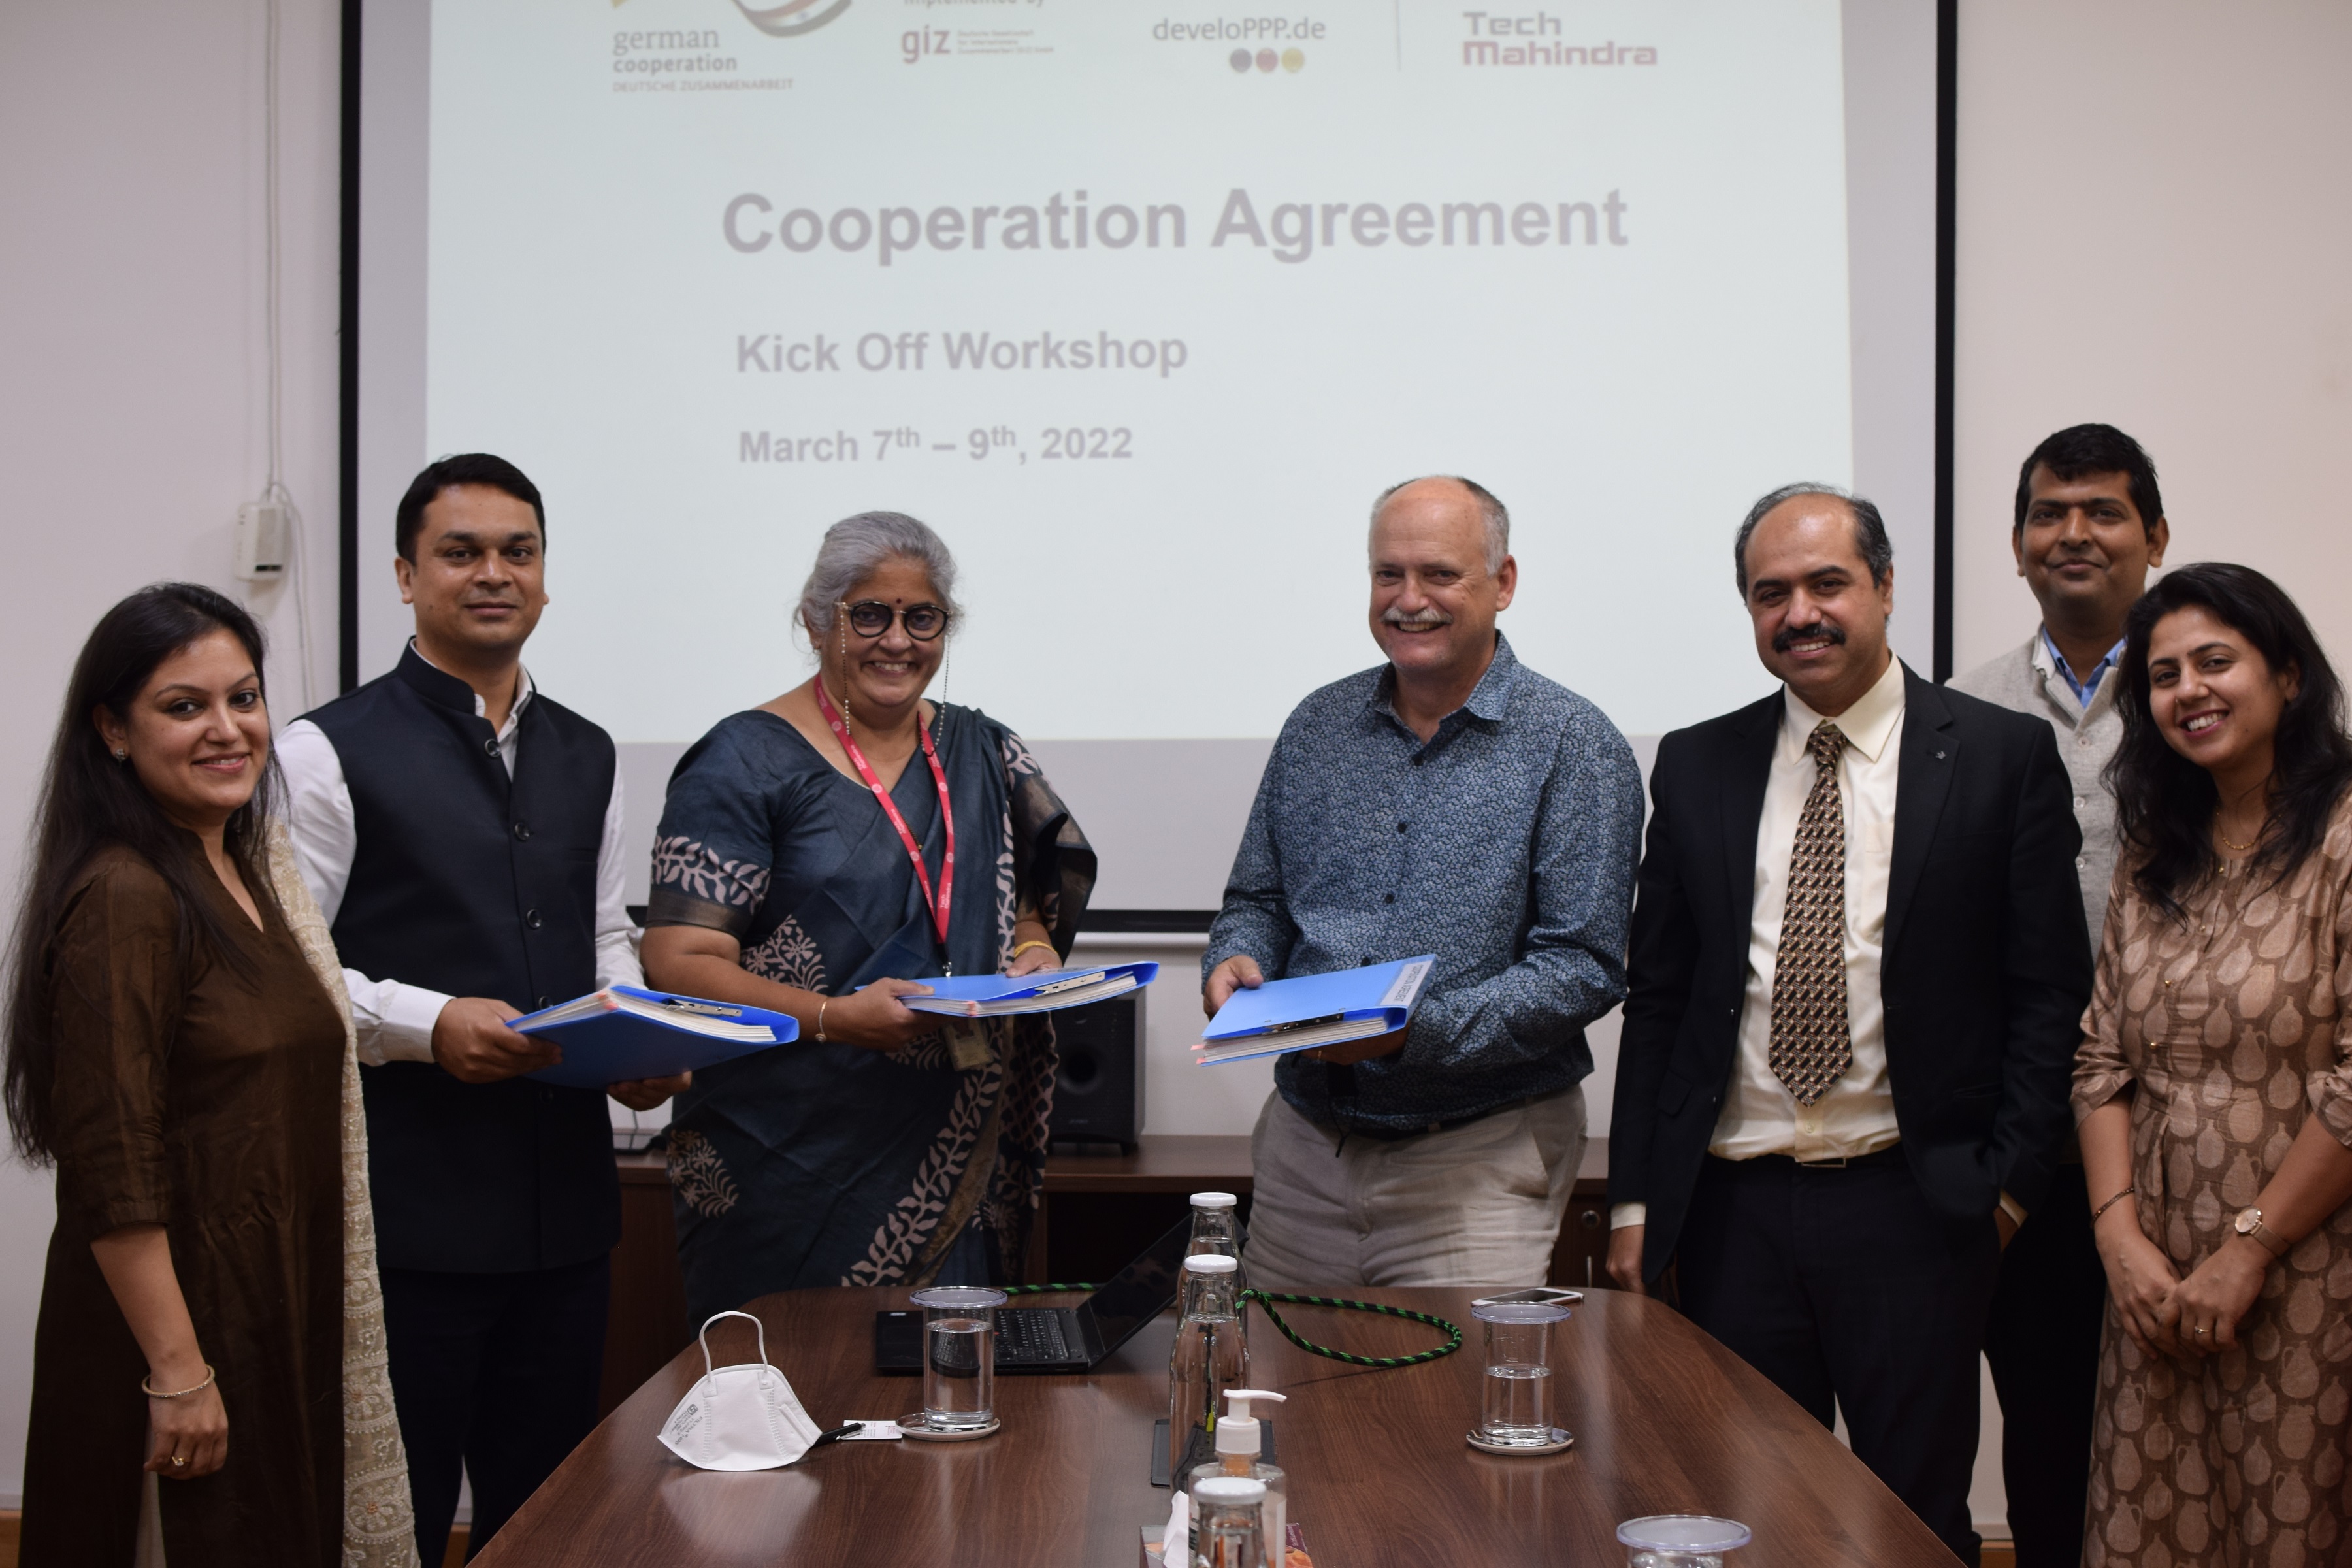 Tech Mahindra in Collaboration with GIZ launches ‘ASCENT’ to Support Quality Vocational Training Amongst Youth in India